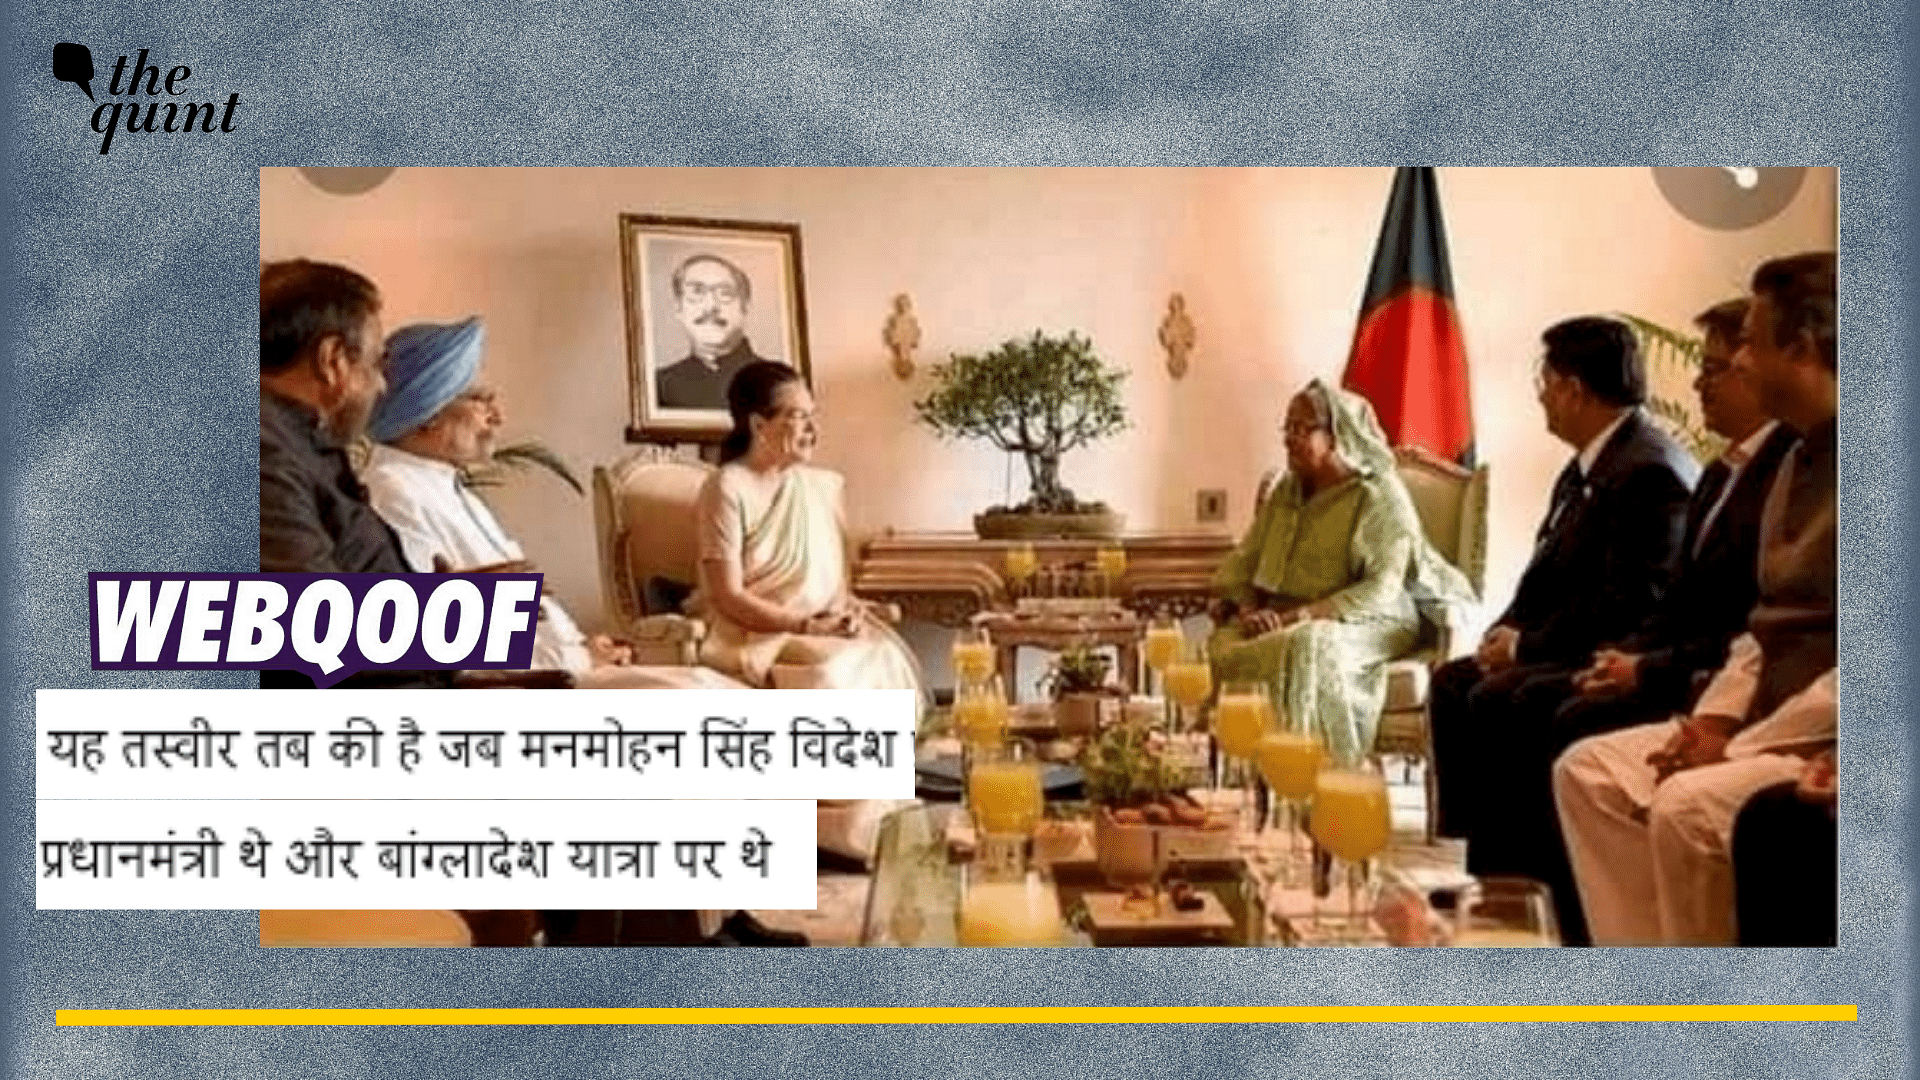 <div class="paragraphs"><p>Fact-Check: This photo is not from when Dr Manmohan Singh was the PM of India.</p></div>